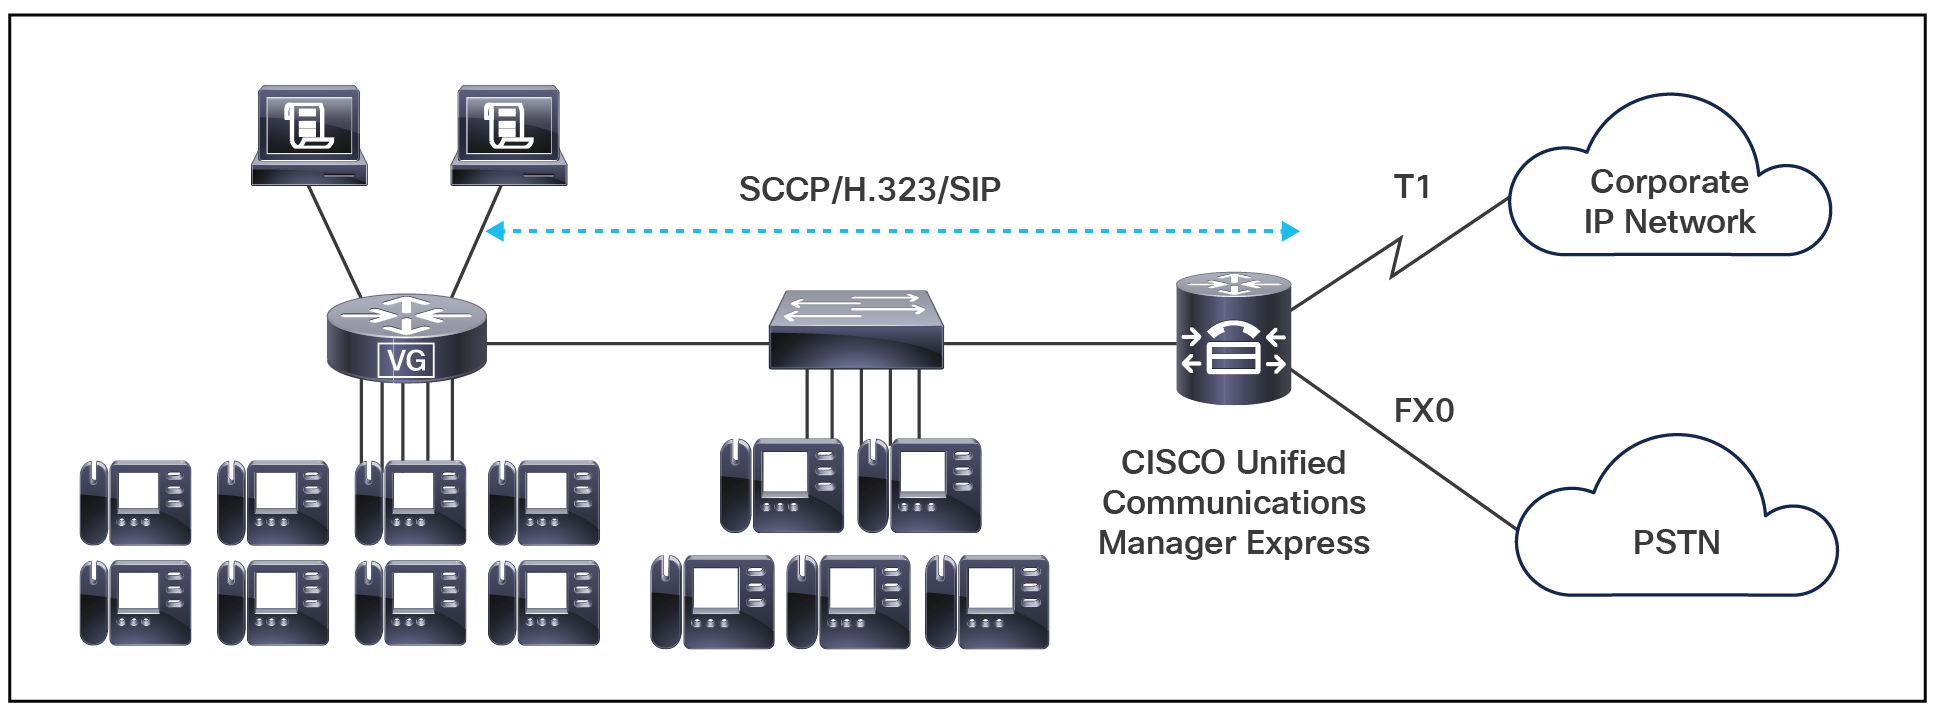 Cisco VG integration with Cisco Unified Communications Manager Express